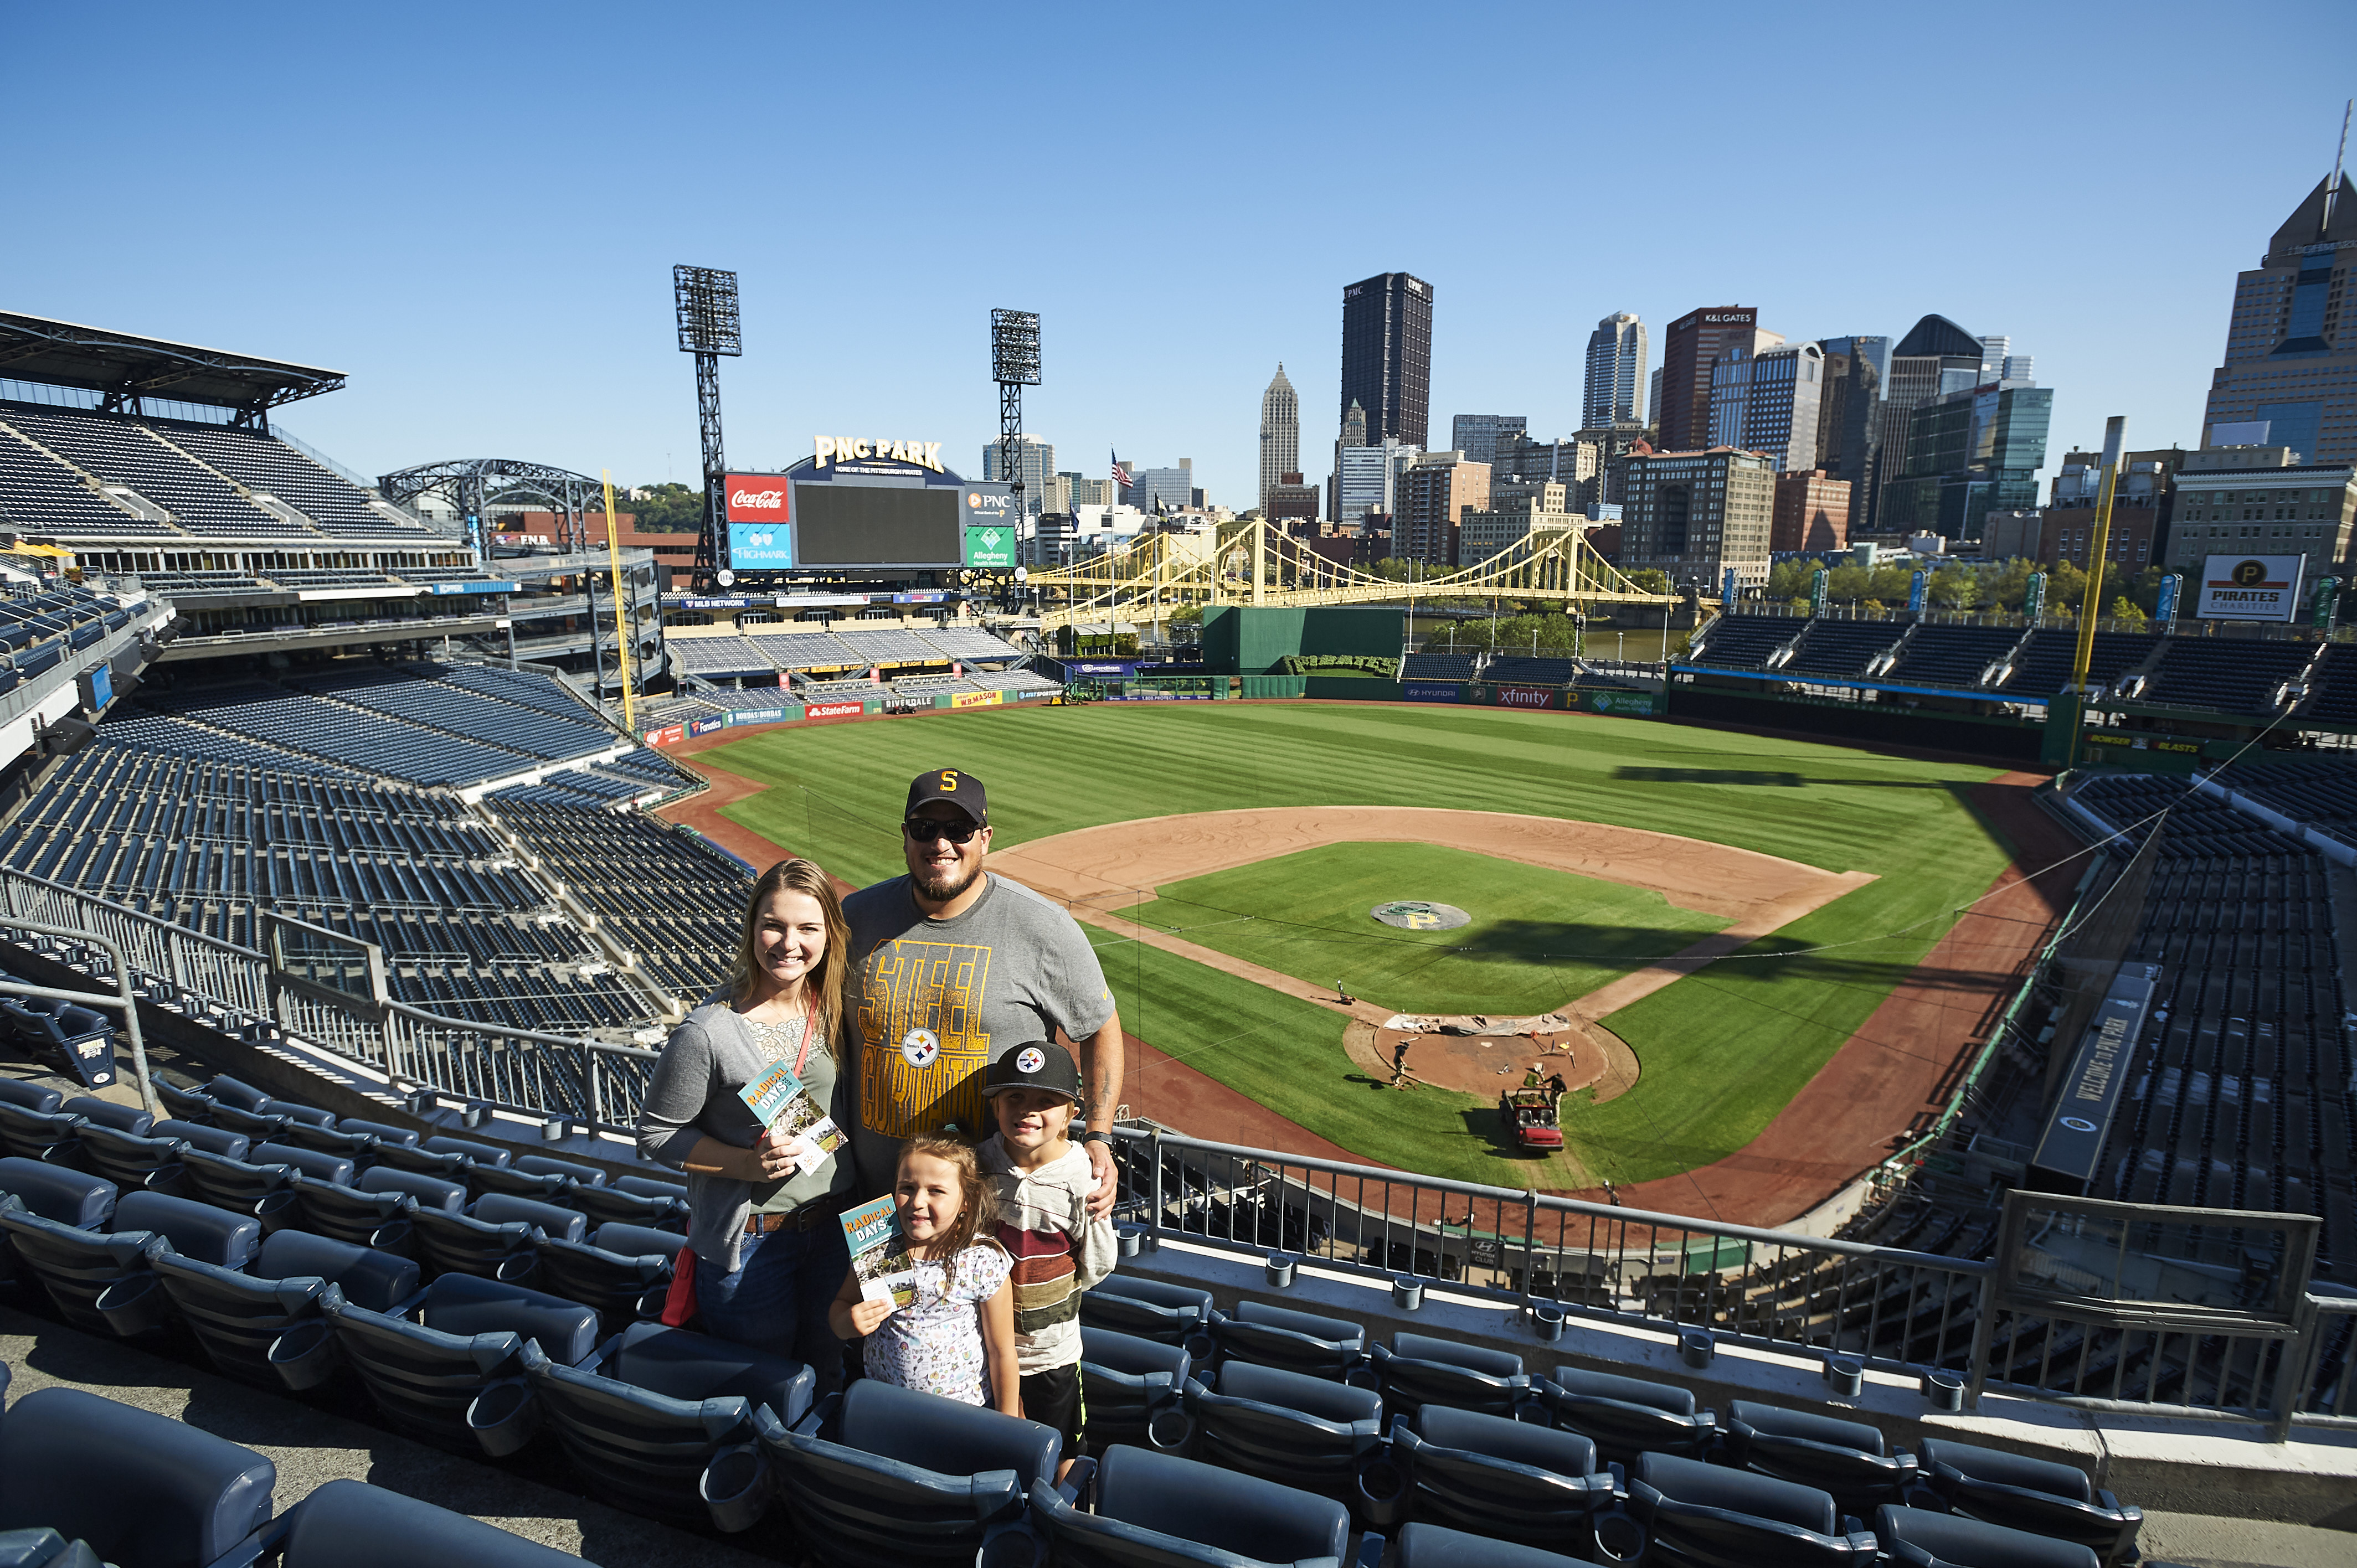 What's new at PNC Park this year?